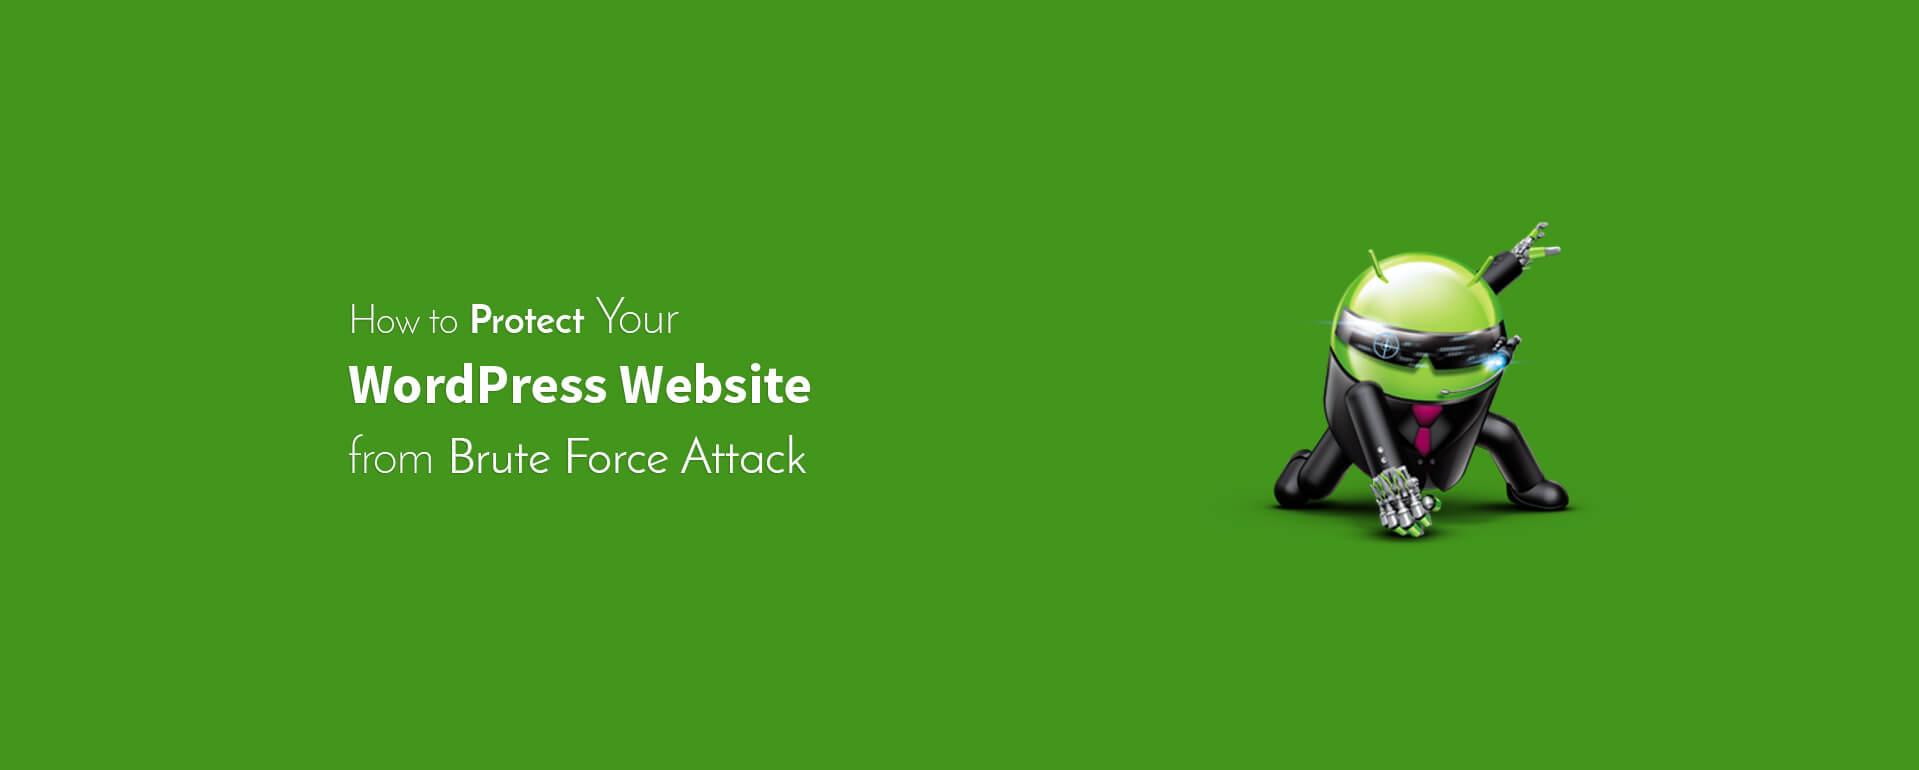 How to Protect Your WordPress Website from Brute Force Attack